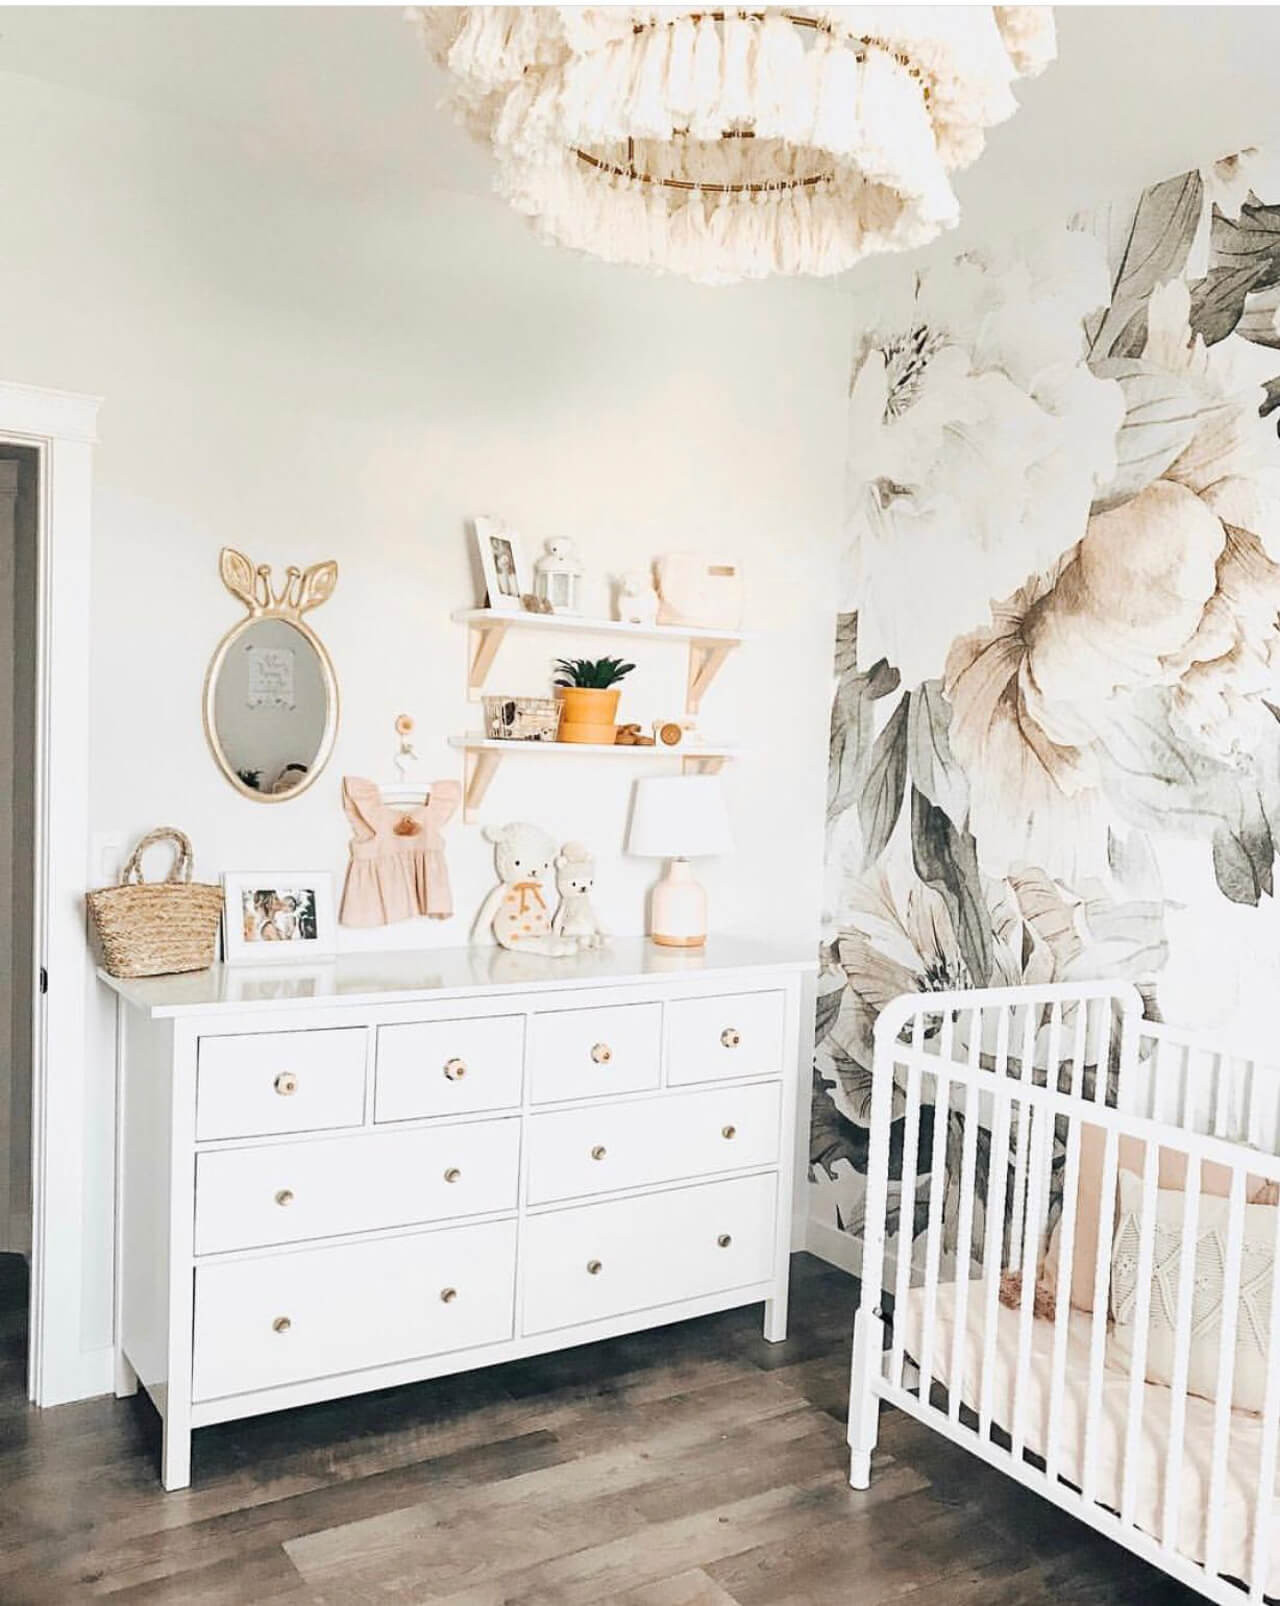 Baby Girl Room Decorations
 Our Baby Girl Nursery Decor Inspiration